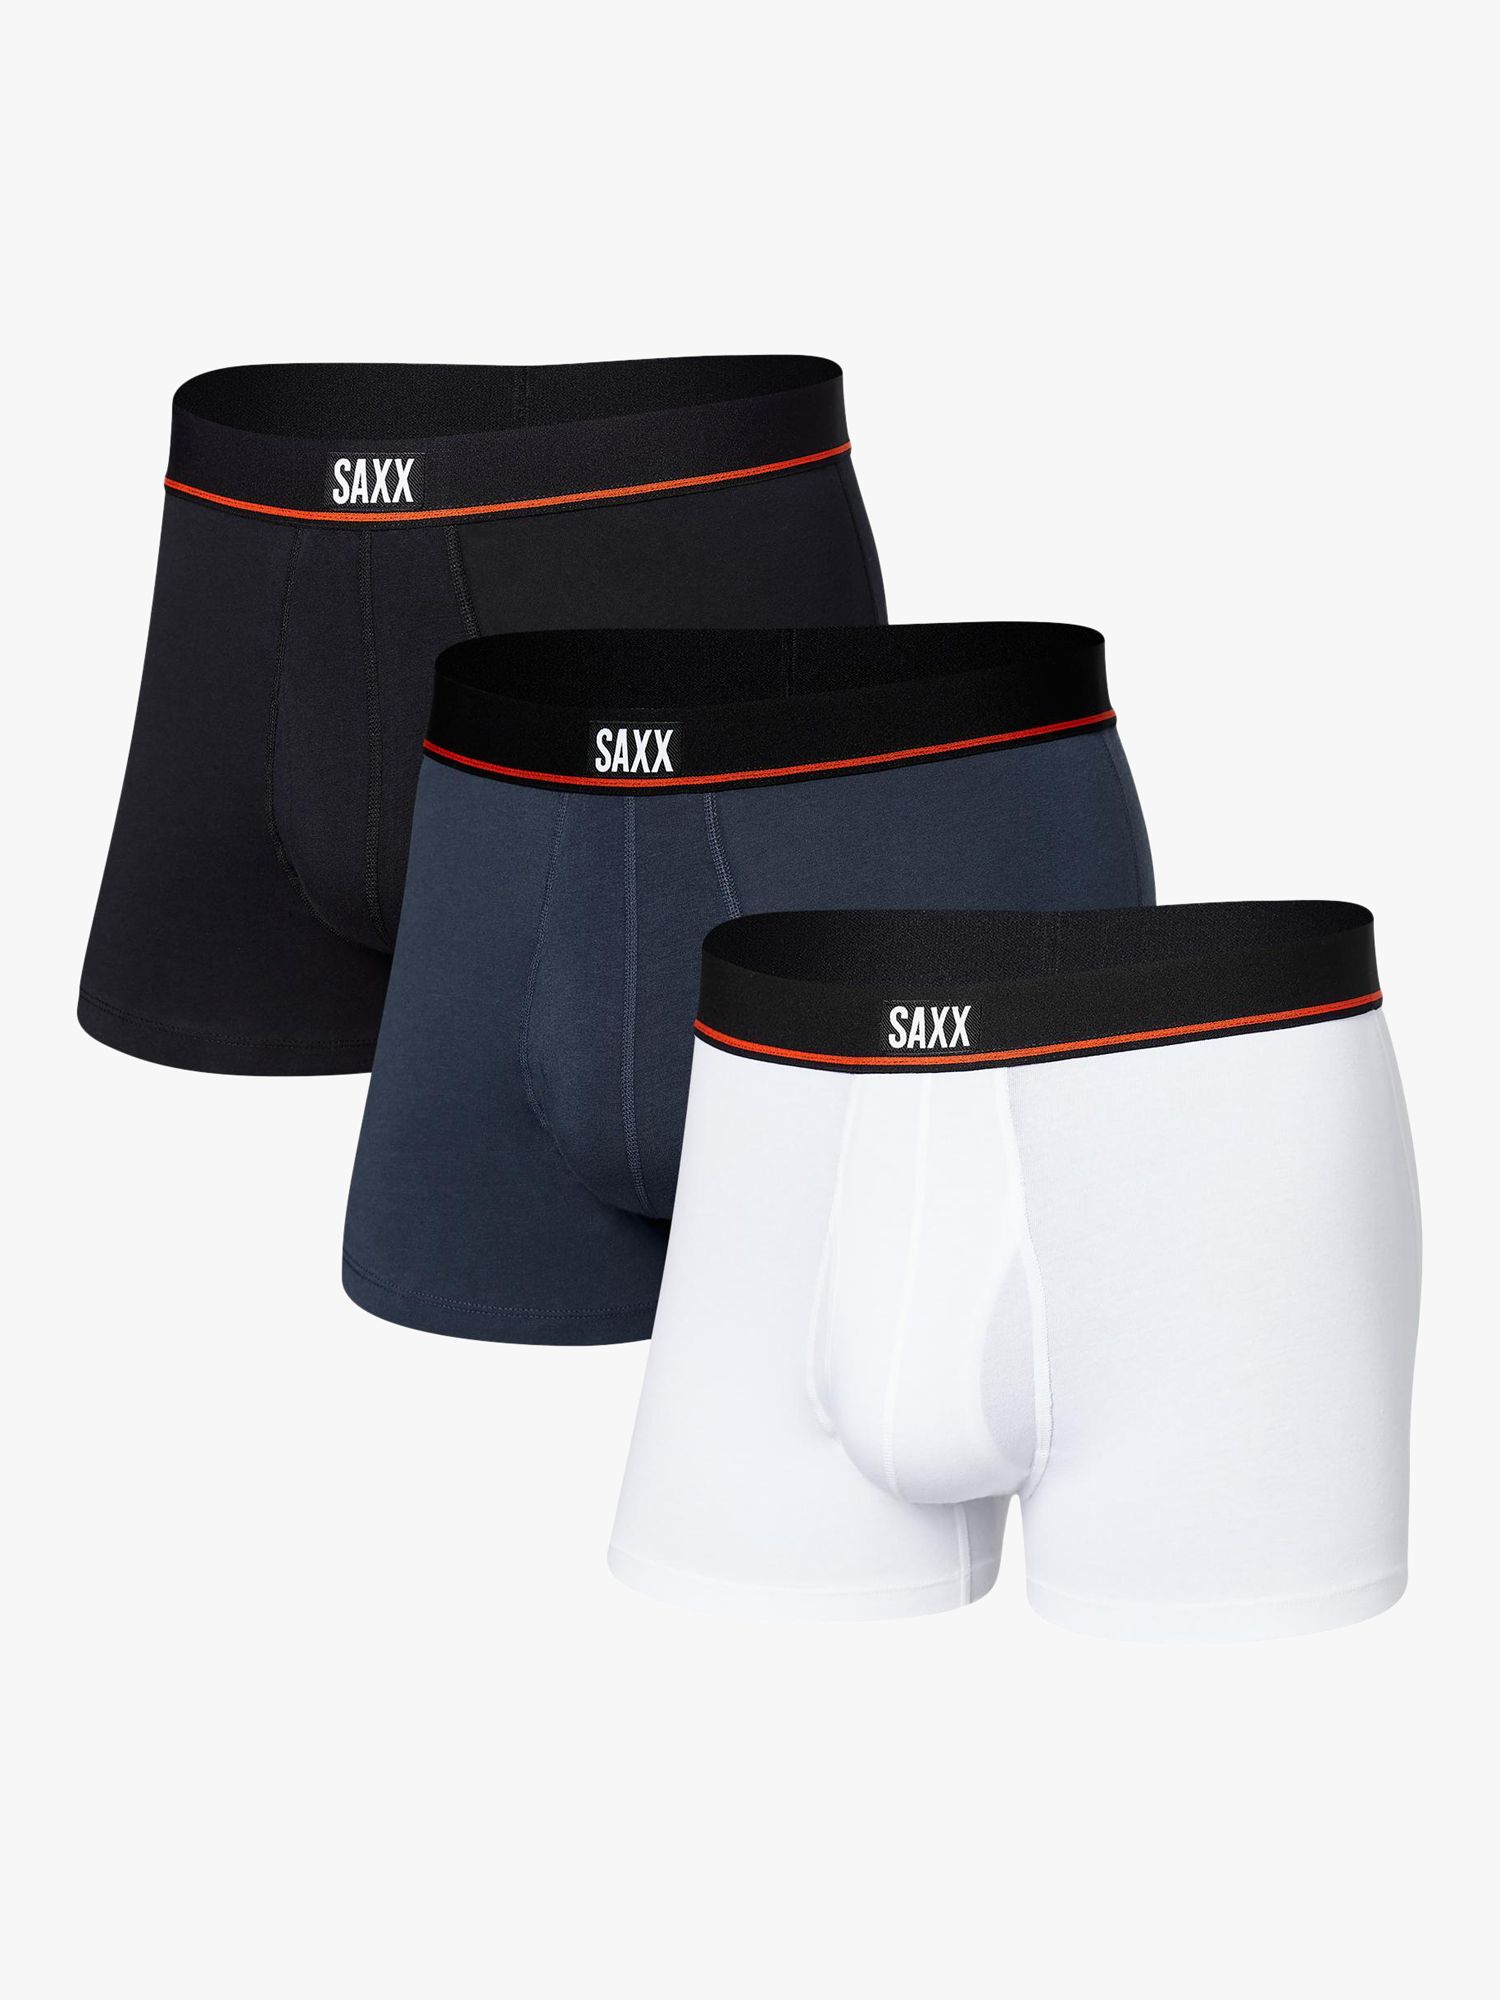 SAXX Non Stop Relaxed Fit Trunks, Pack of 3, Black/Navy/White at John ...